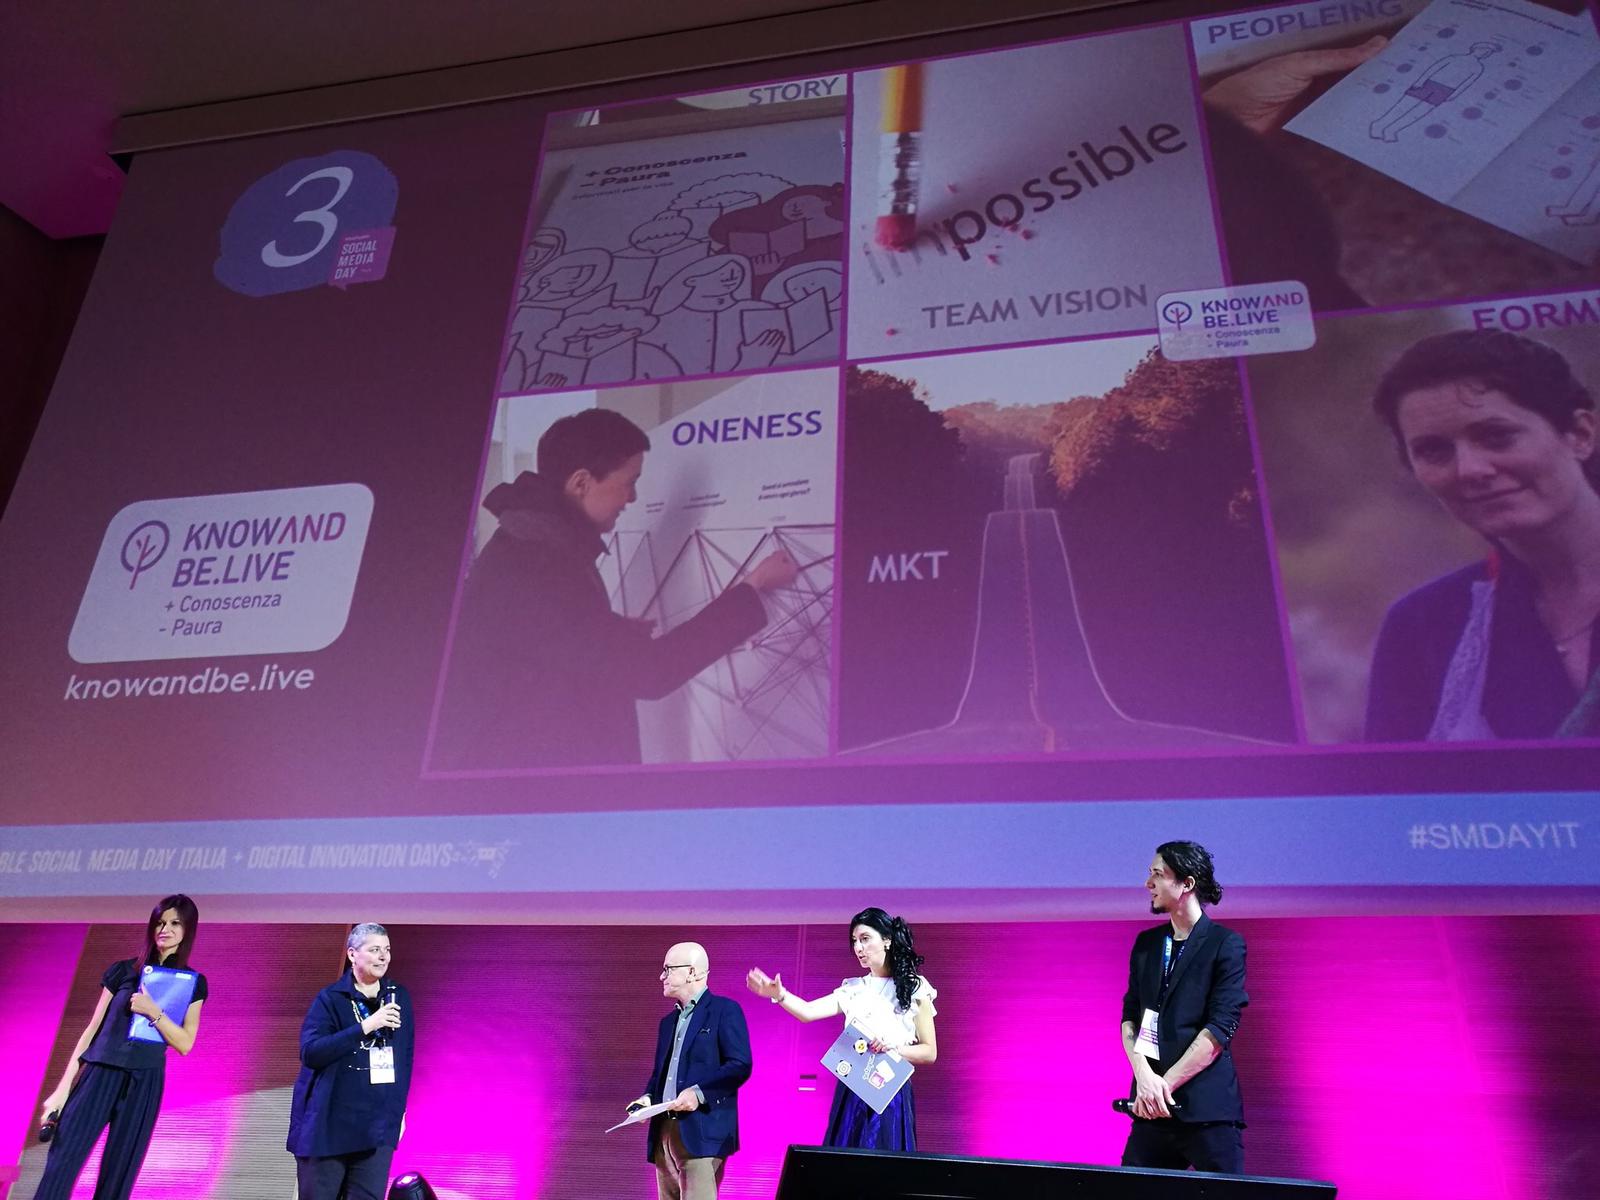 KnowAndBe.live wins the 3rd prize at the startup competition of the Mashable Social Media Day Italy 2018 - Knowandbe.live